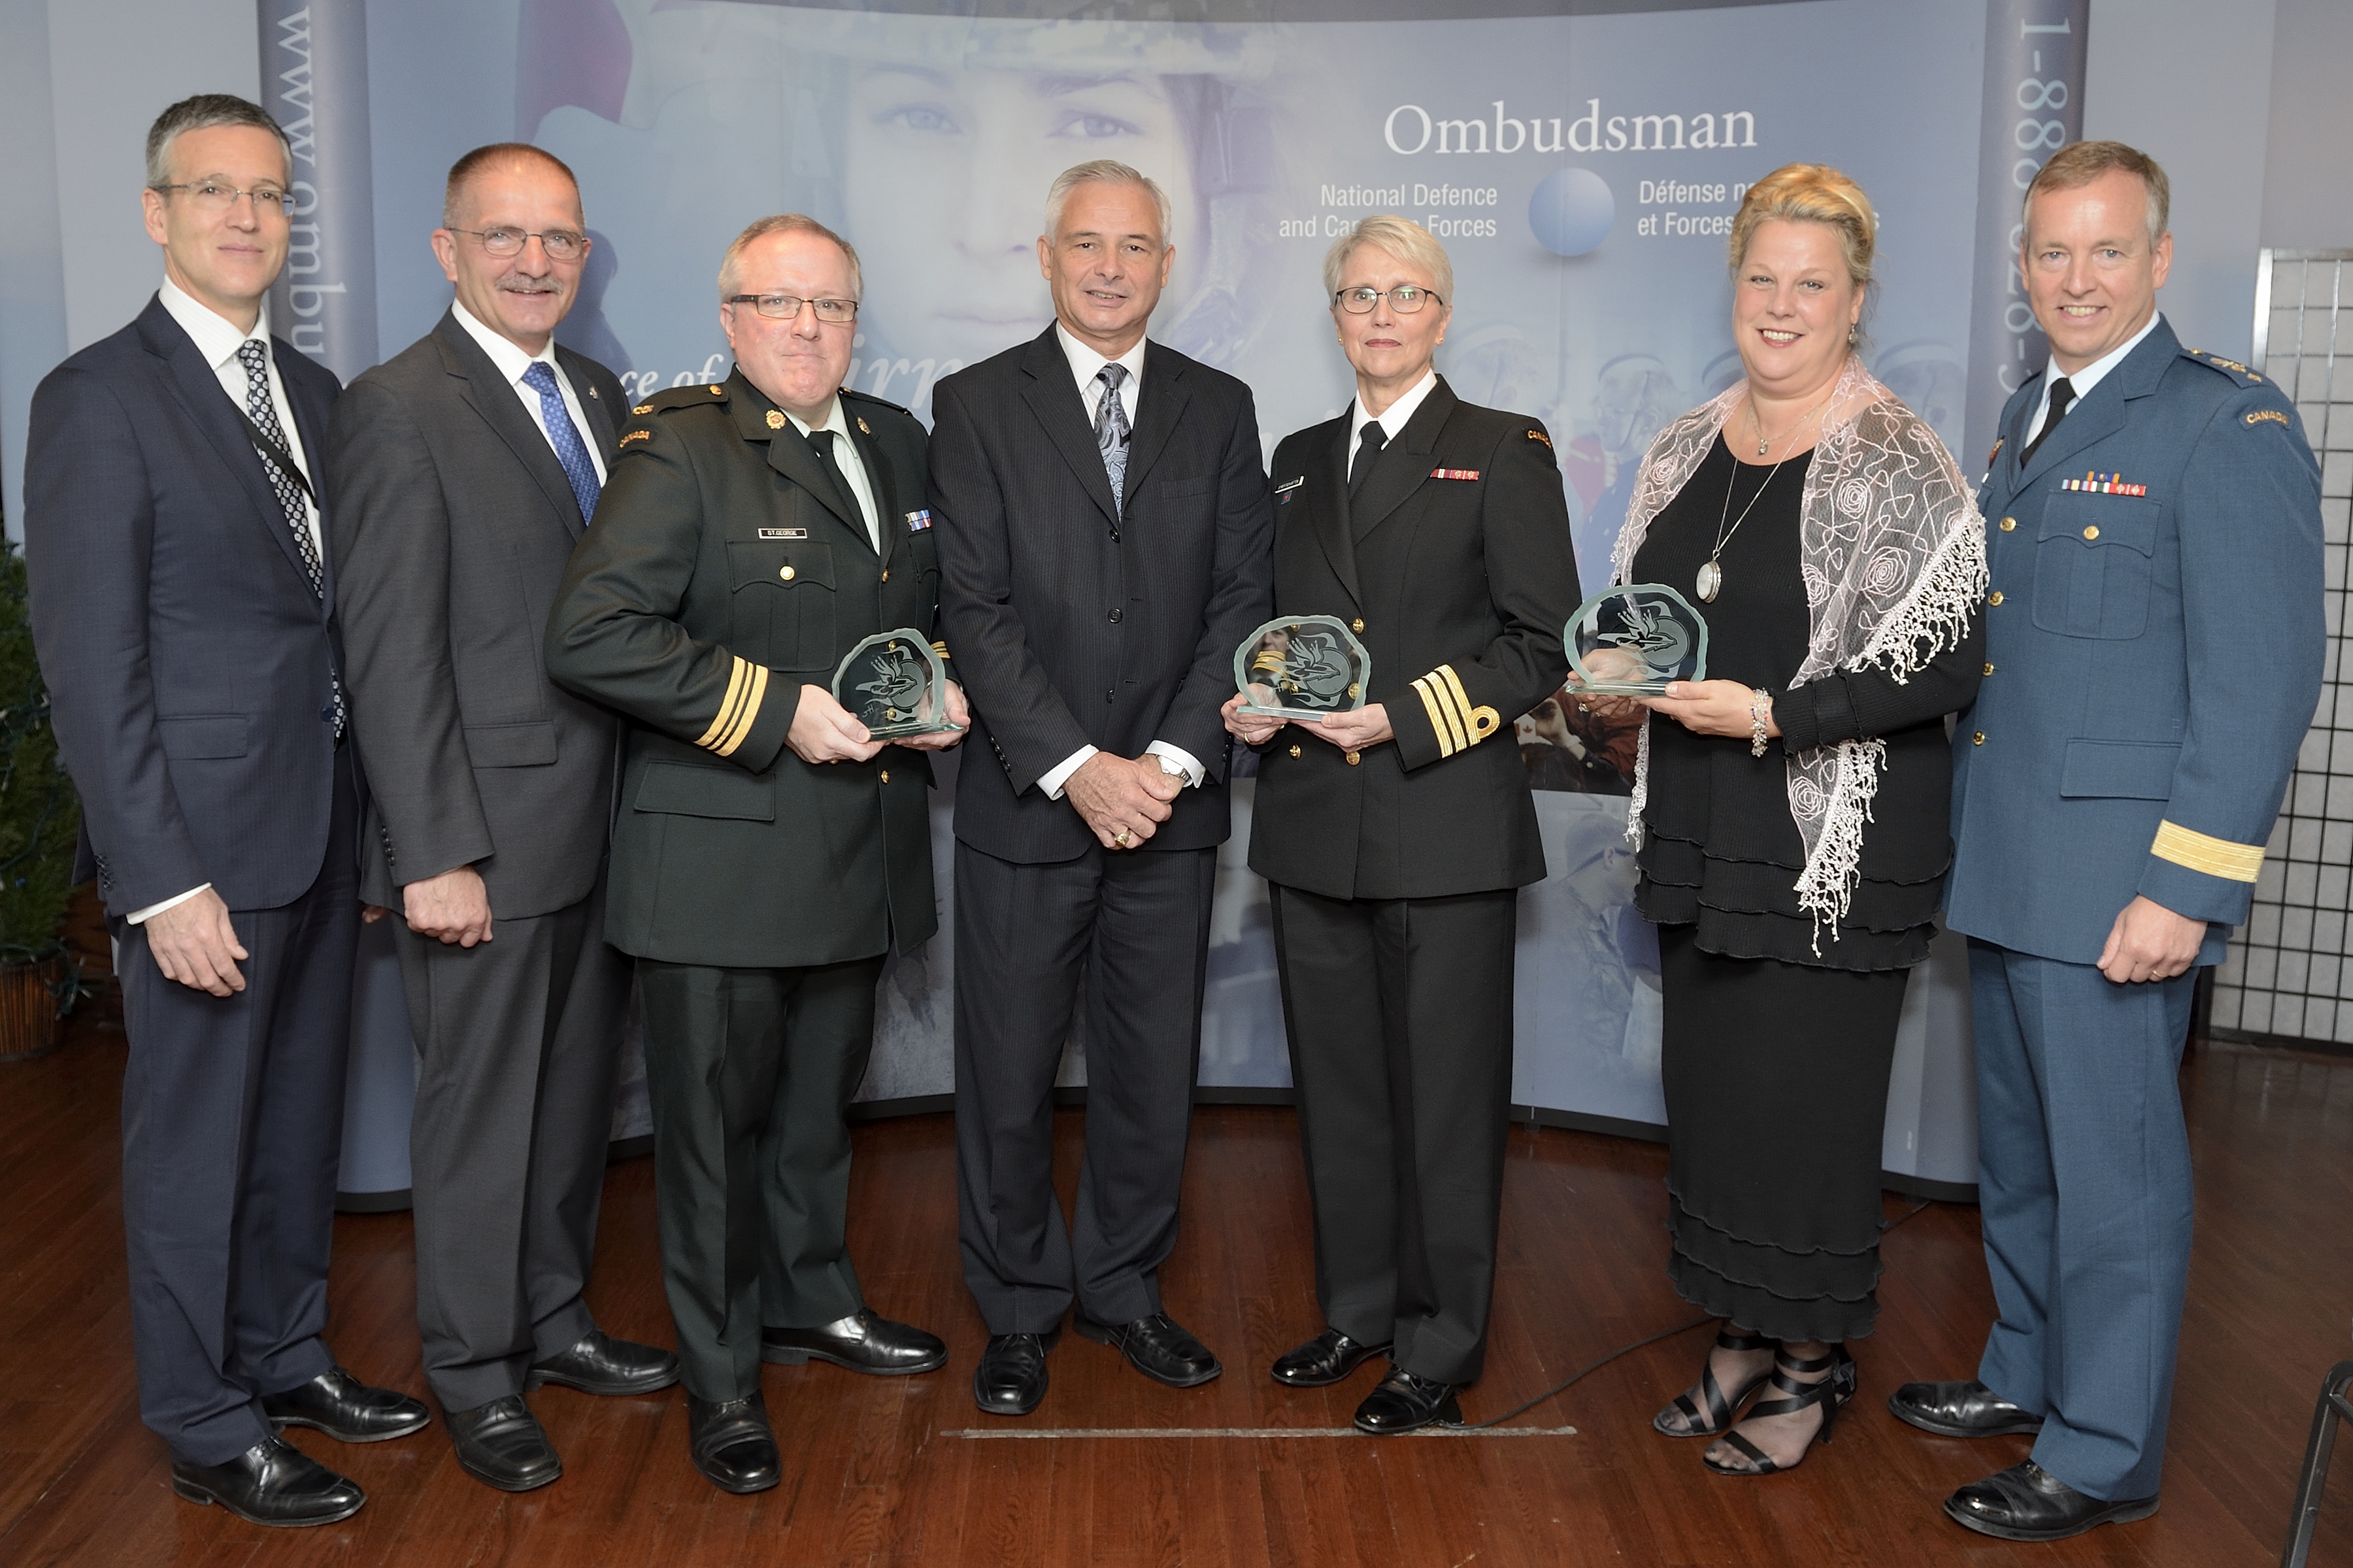 Photo of commendation recipients, the Ombudsman and special guests.